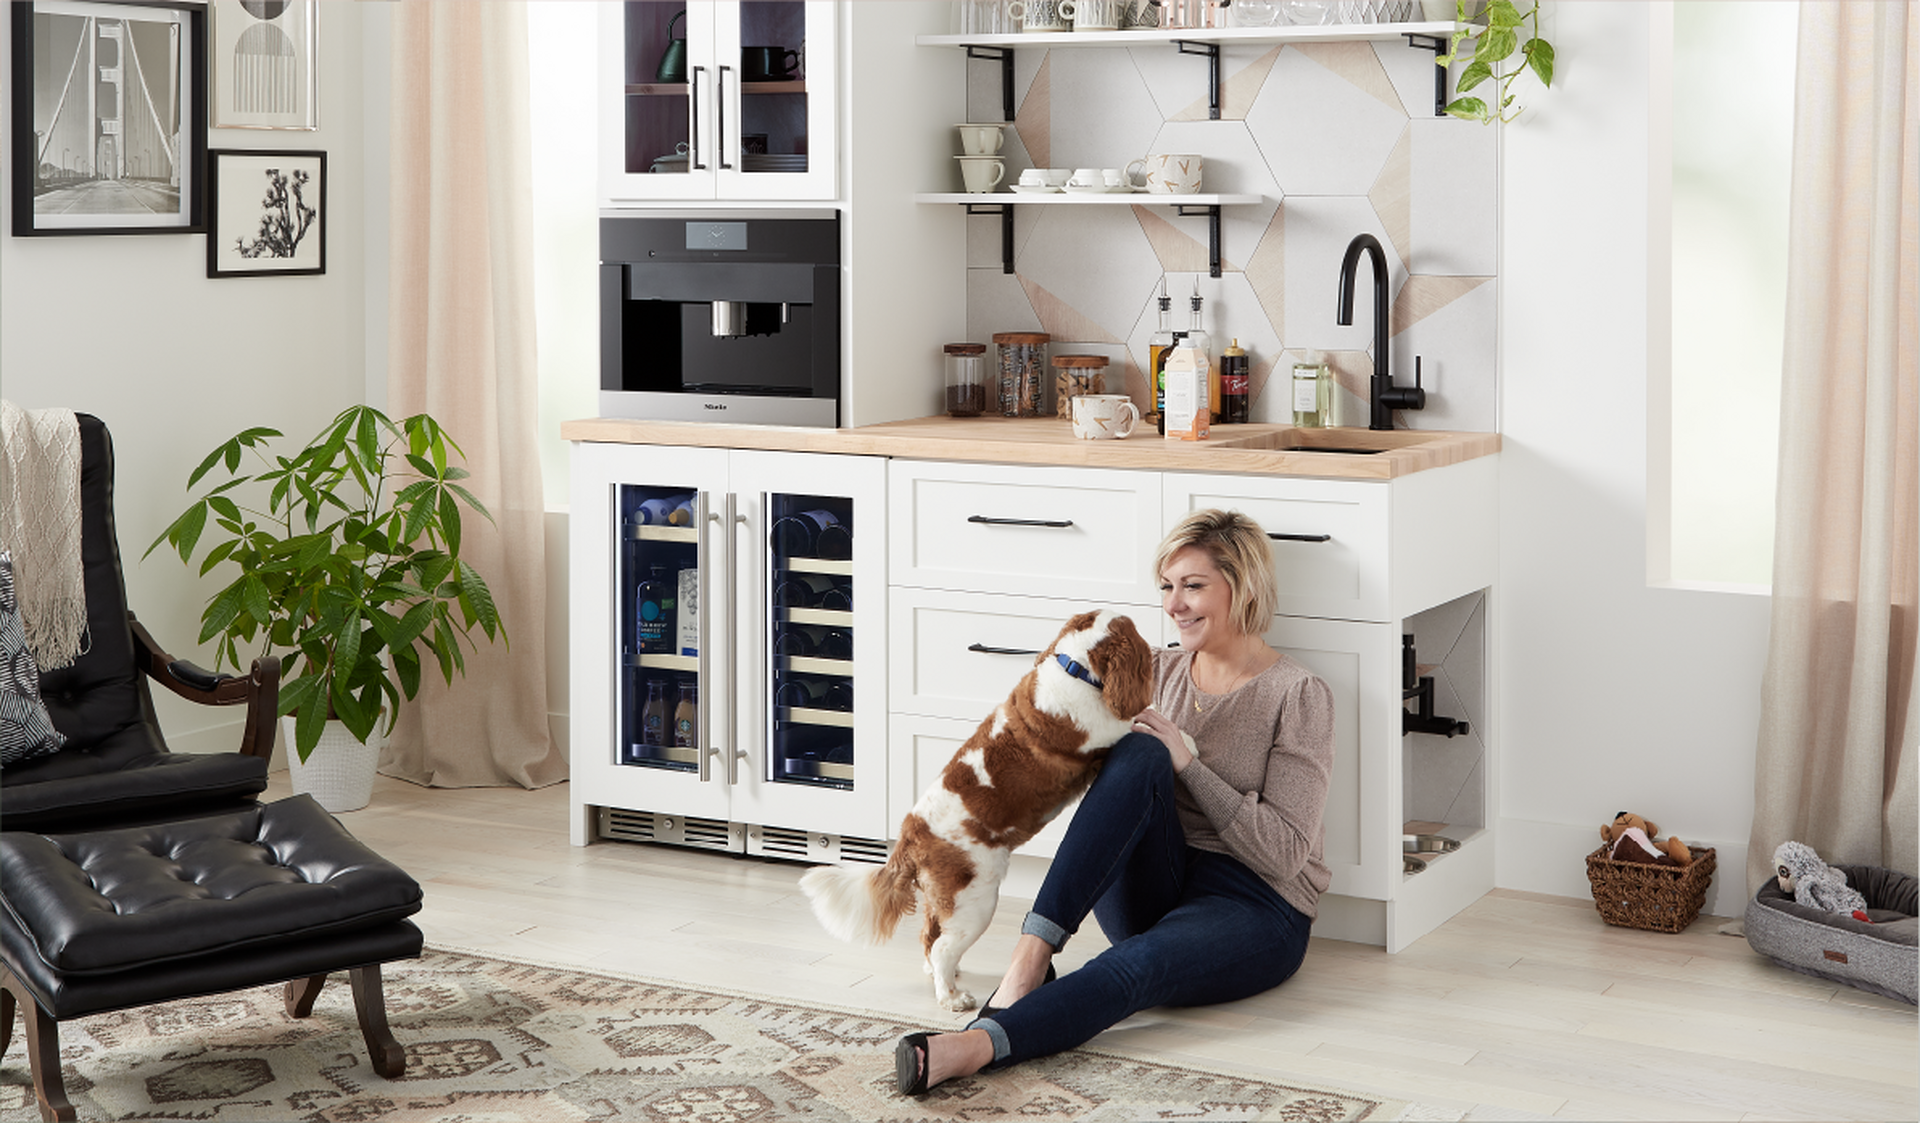 woman in modern kitchen with a dog